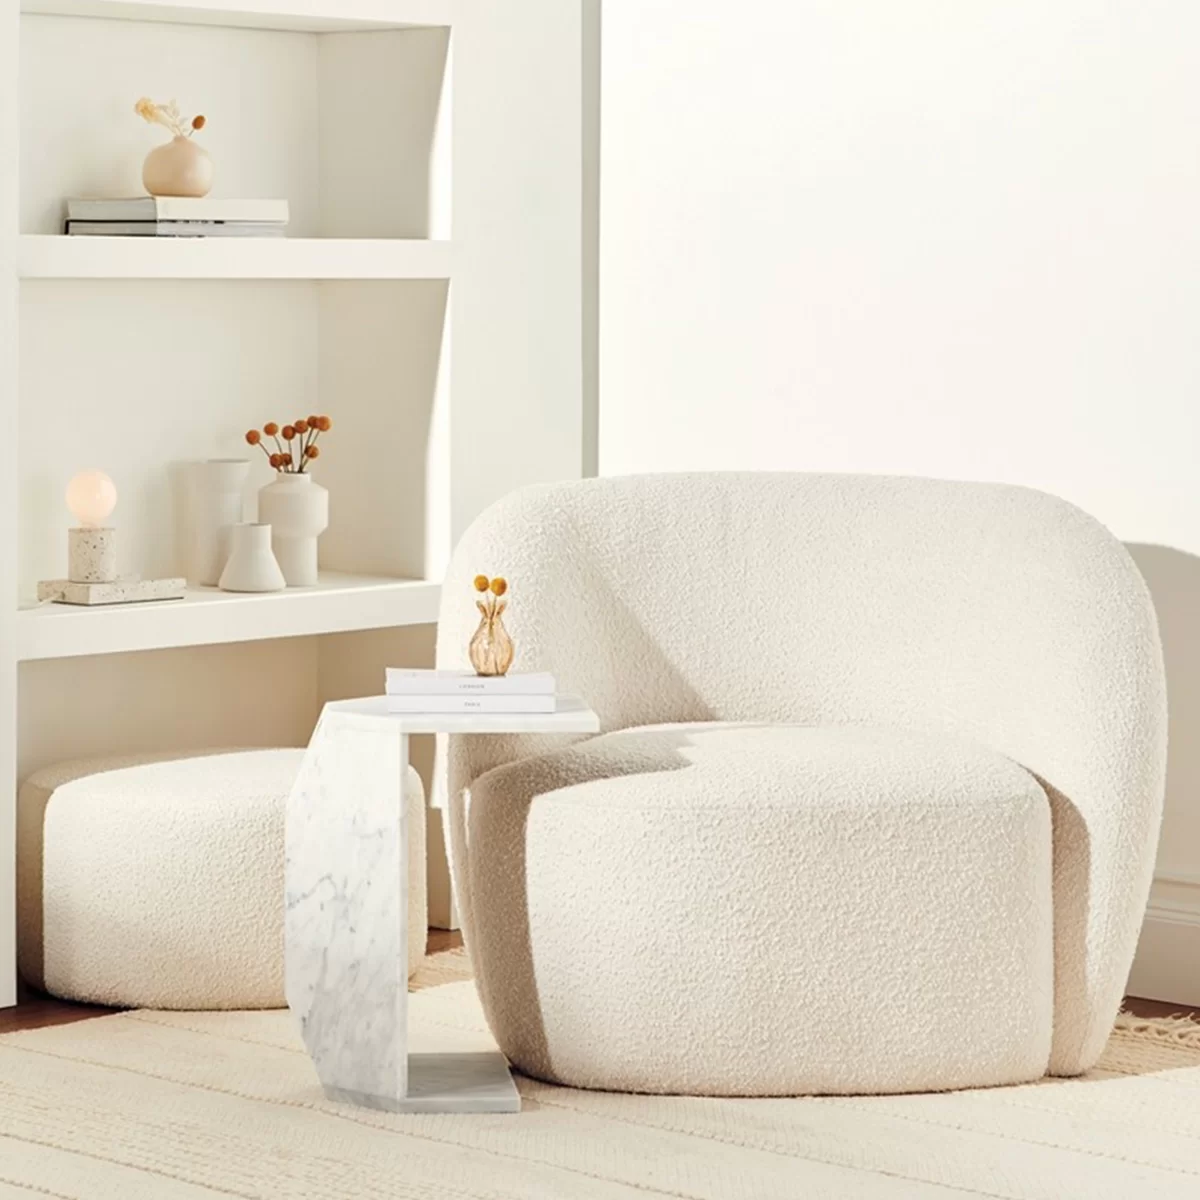 If you want to add modernity to your design, then buy the Nuevo Selma Occasional Chair Coconut Boucle